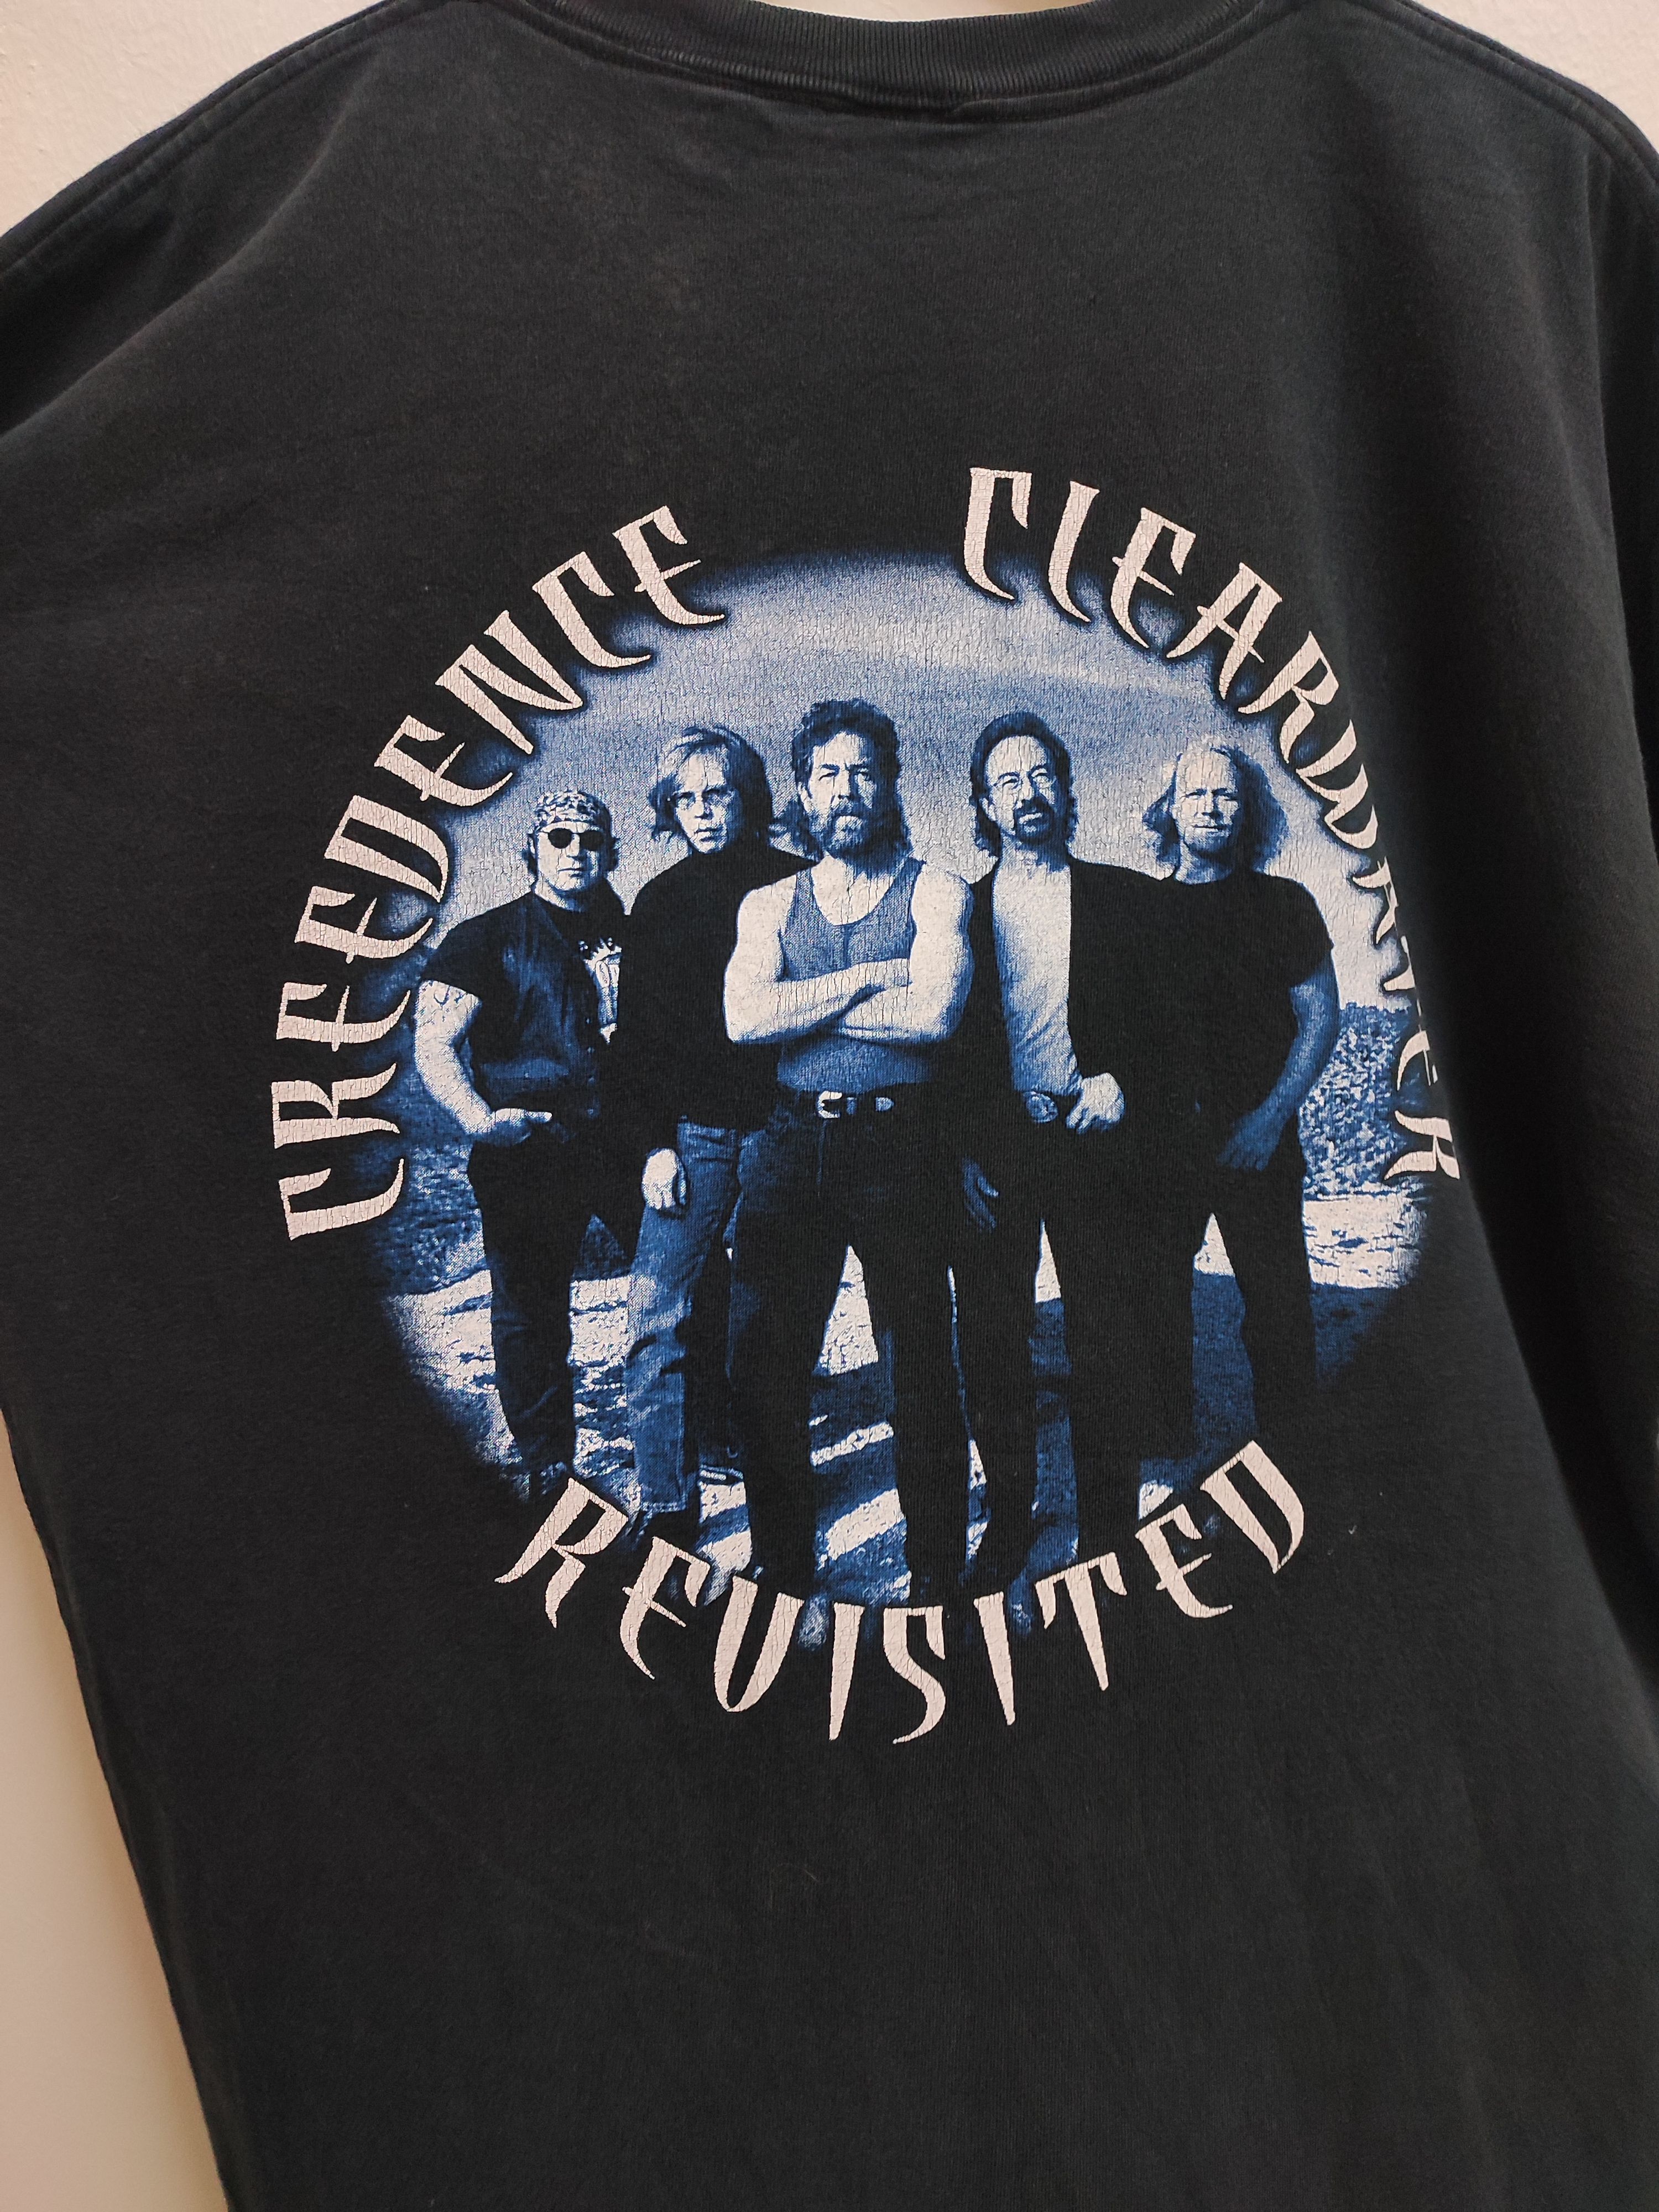 Vintage Rare Creedence Clearwater Revisited Band Tour Vintage Tee Size US XL / EU 56 / 4 - 1 Preview